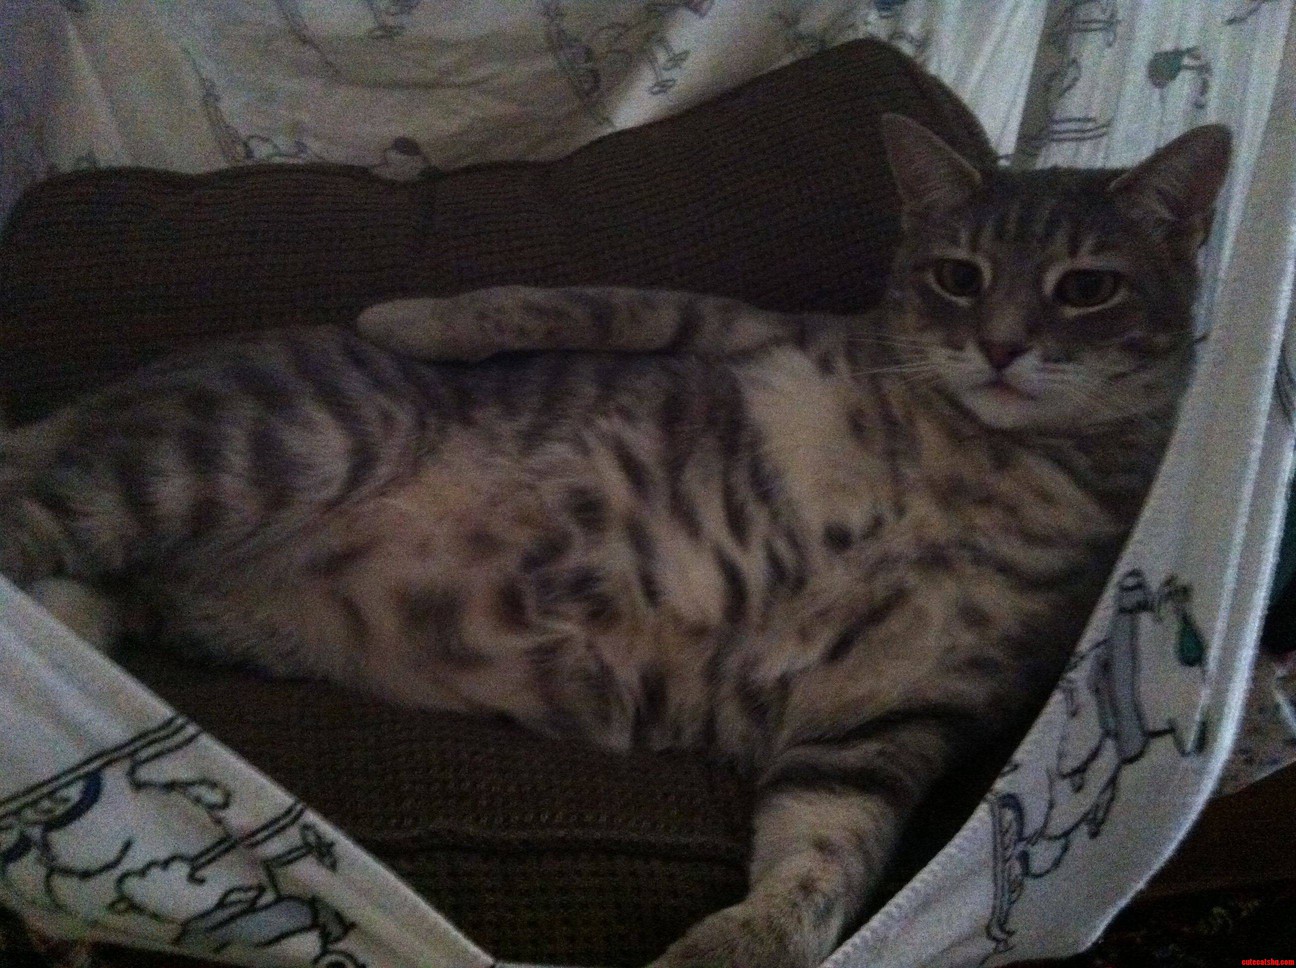 Draw Me Like One Of Your French Girls.